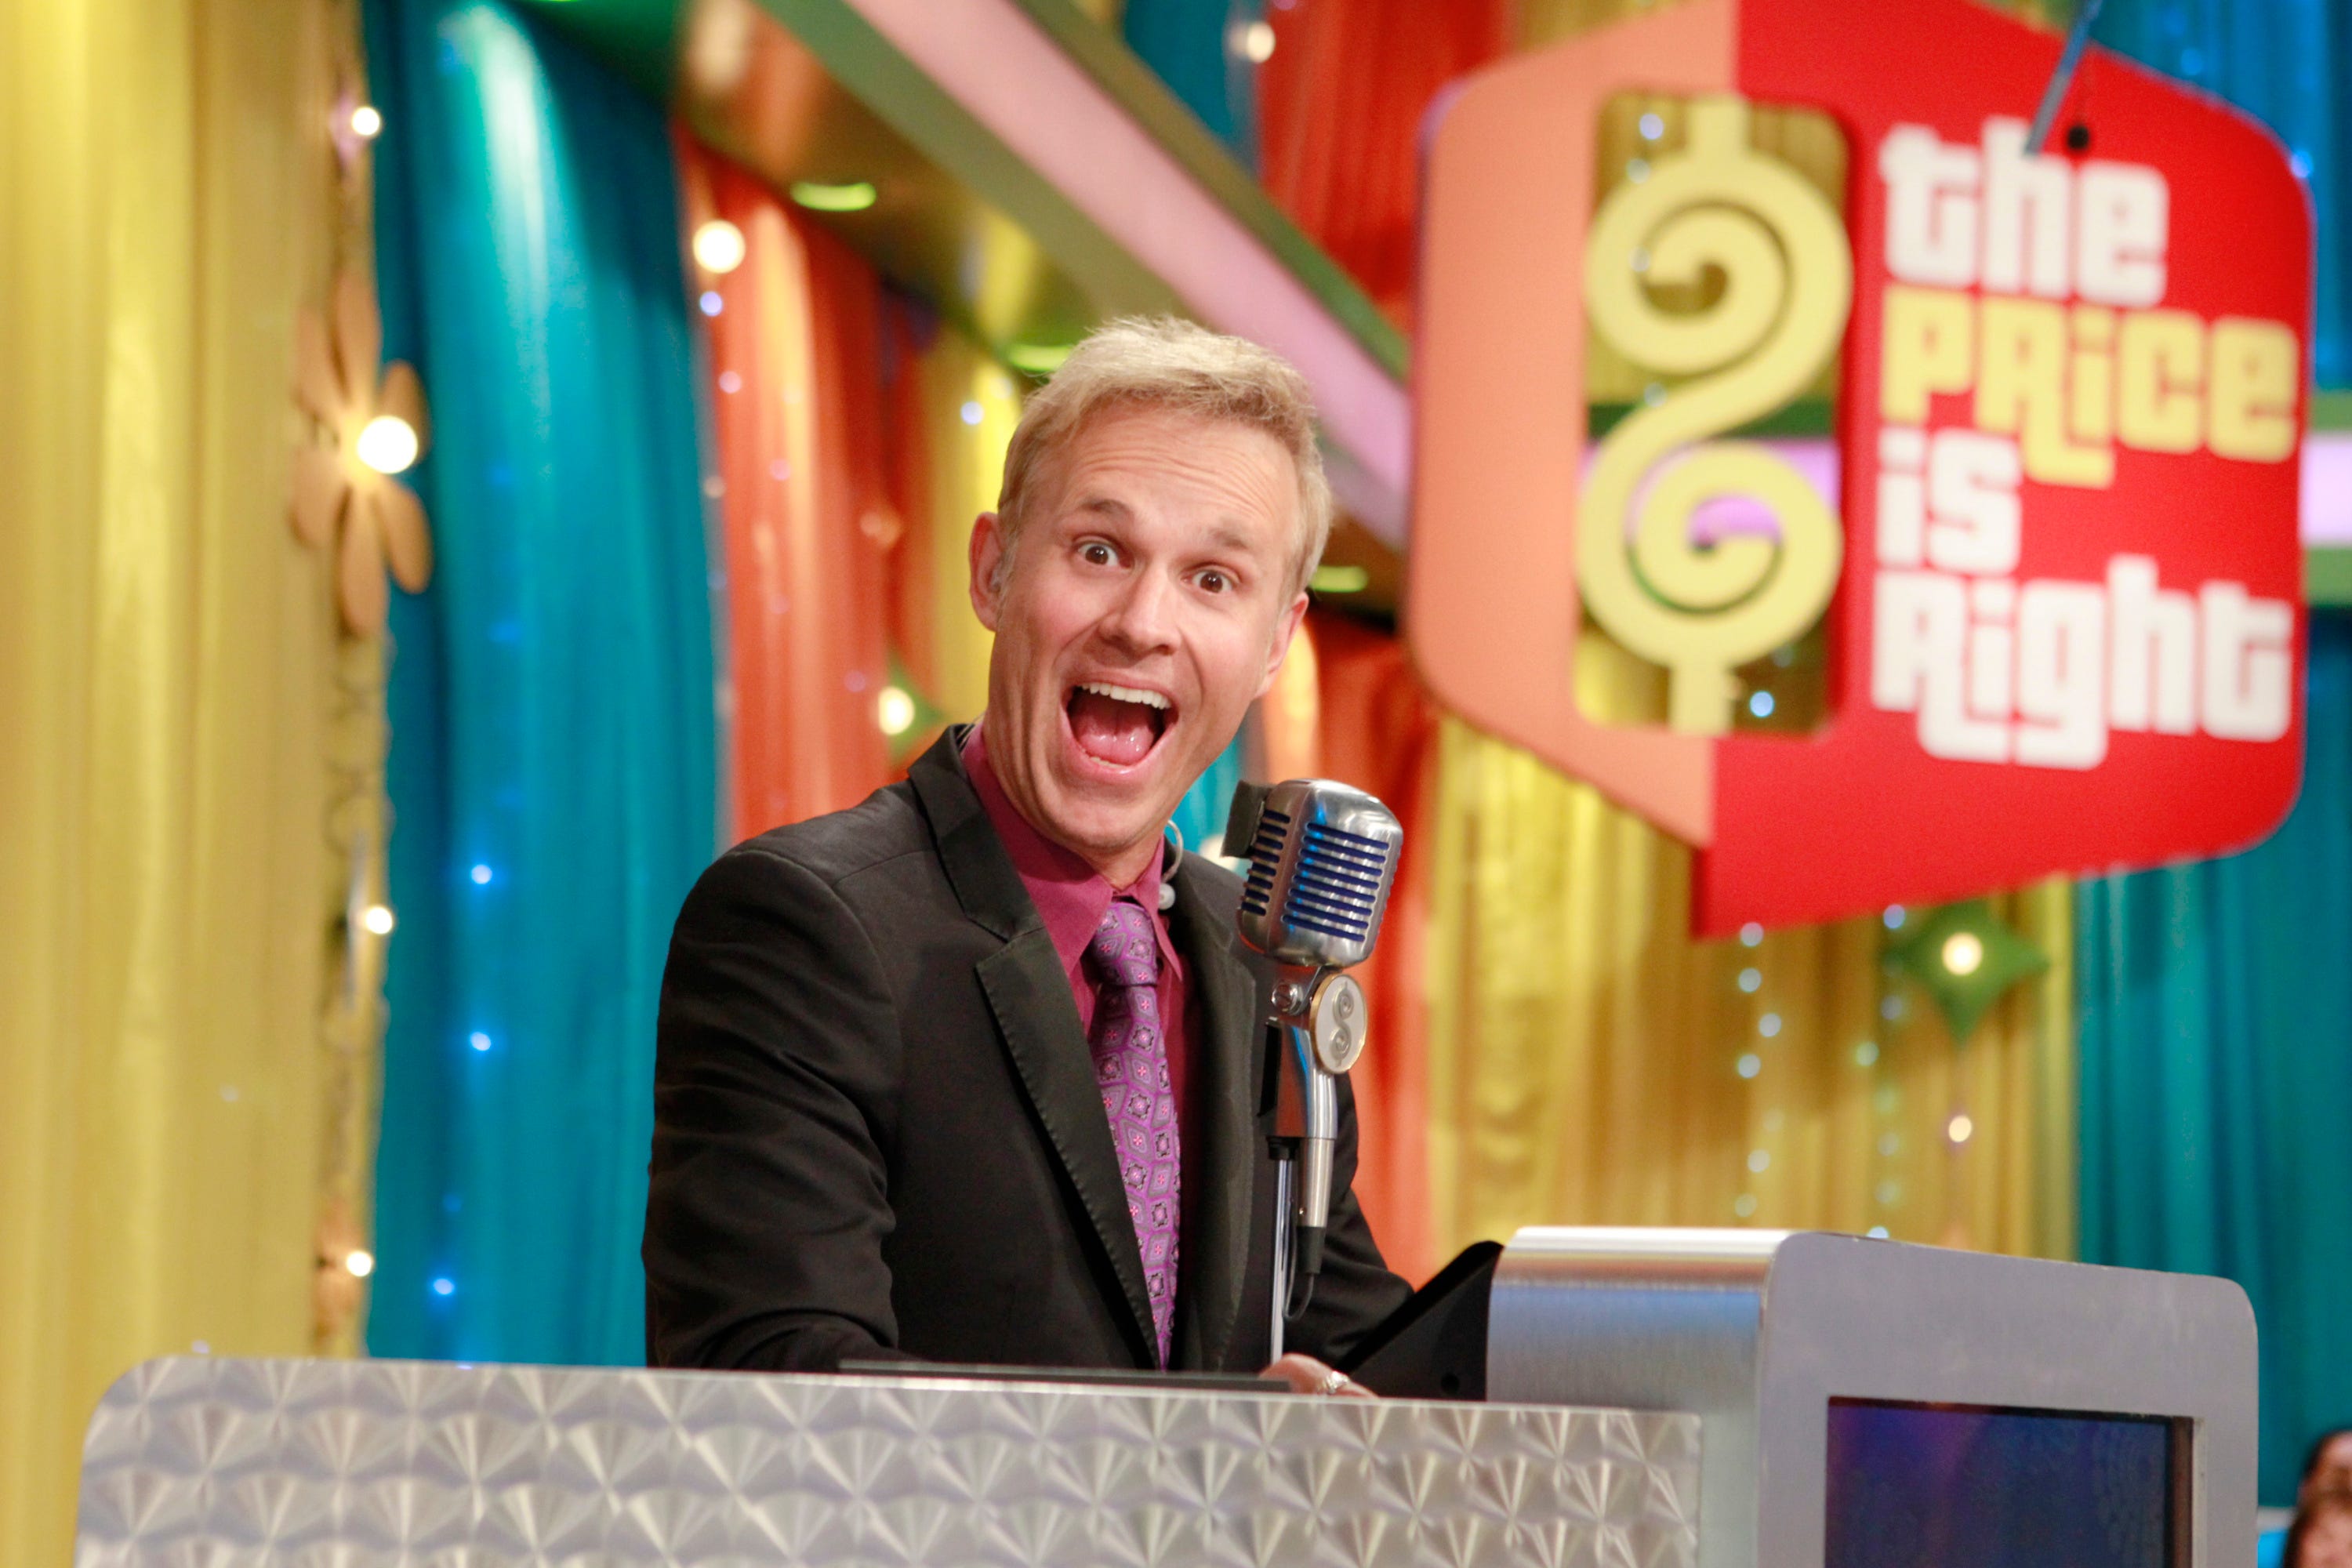 price is right announcer